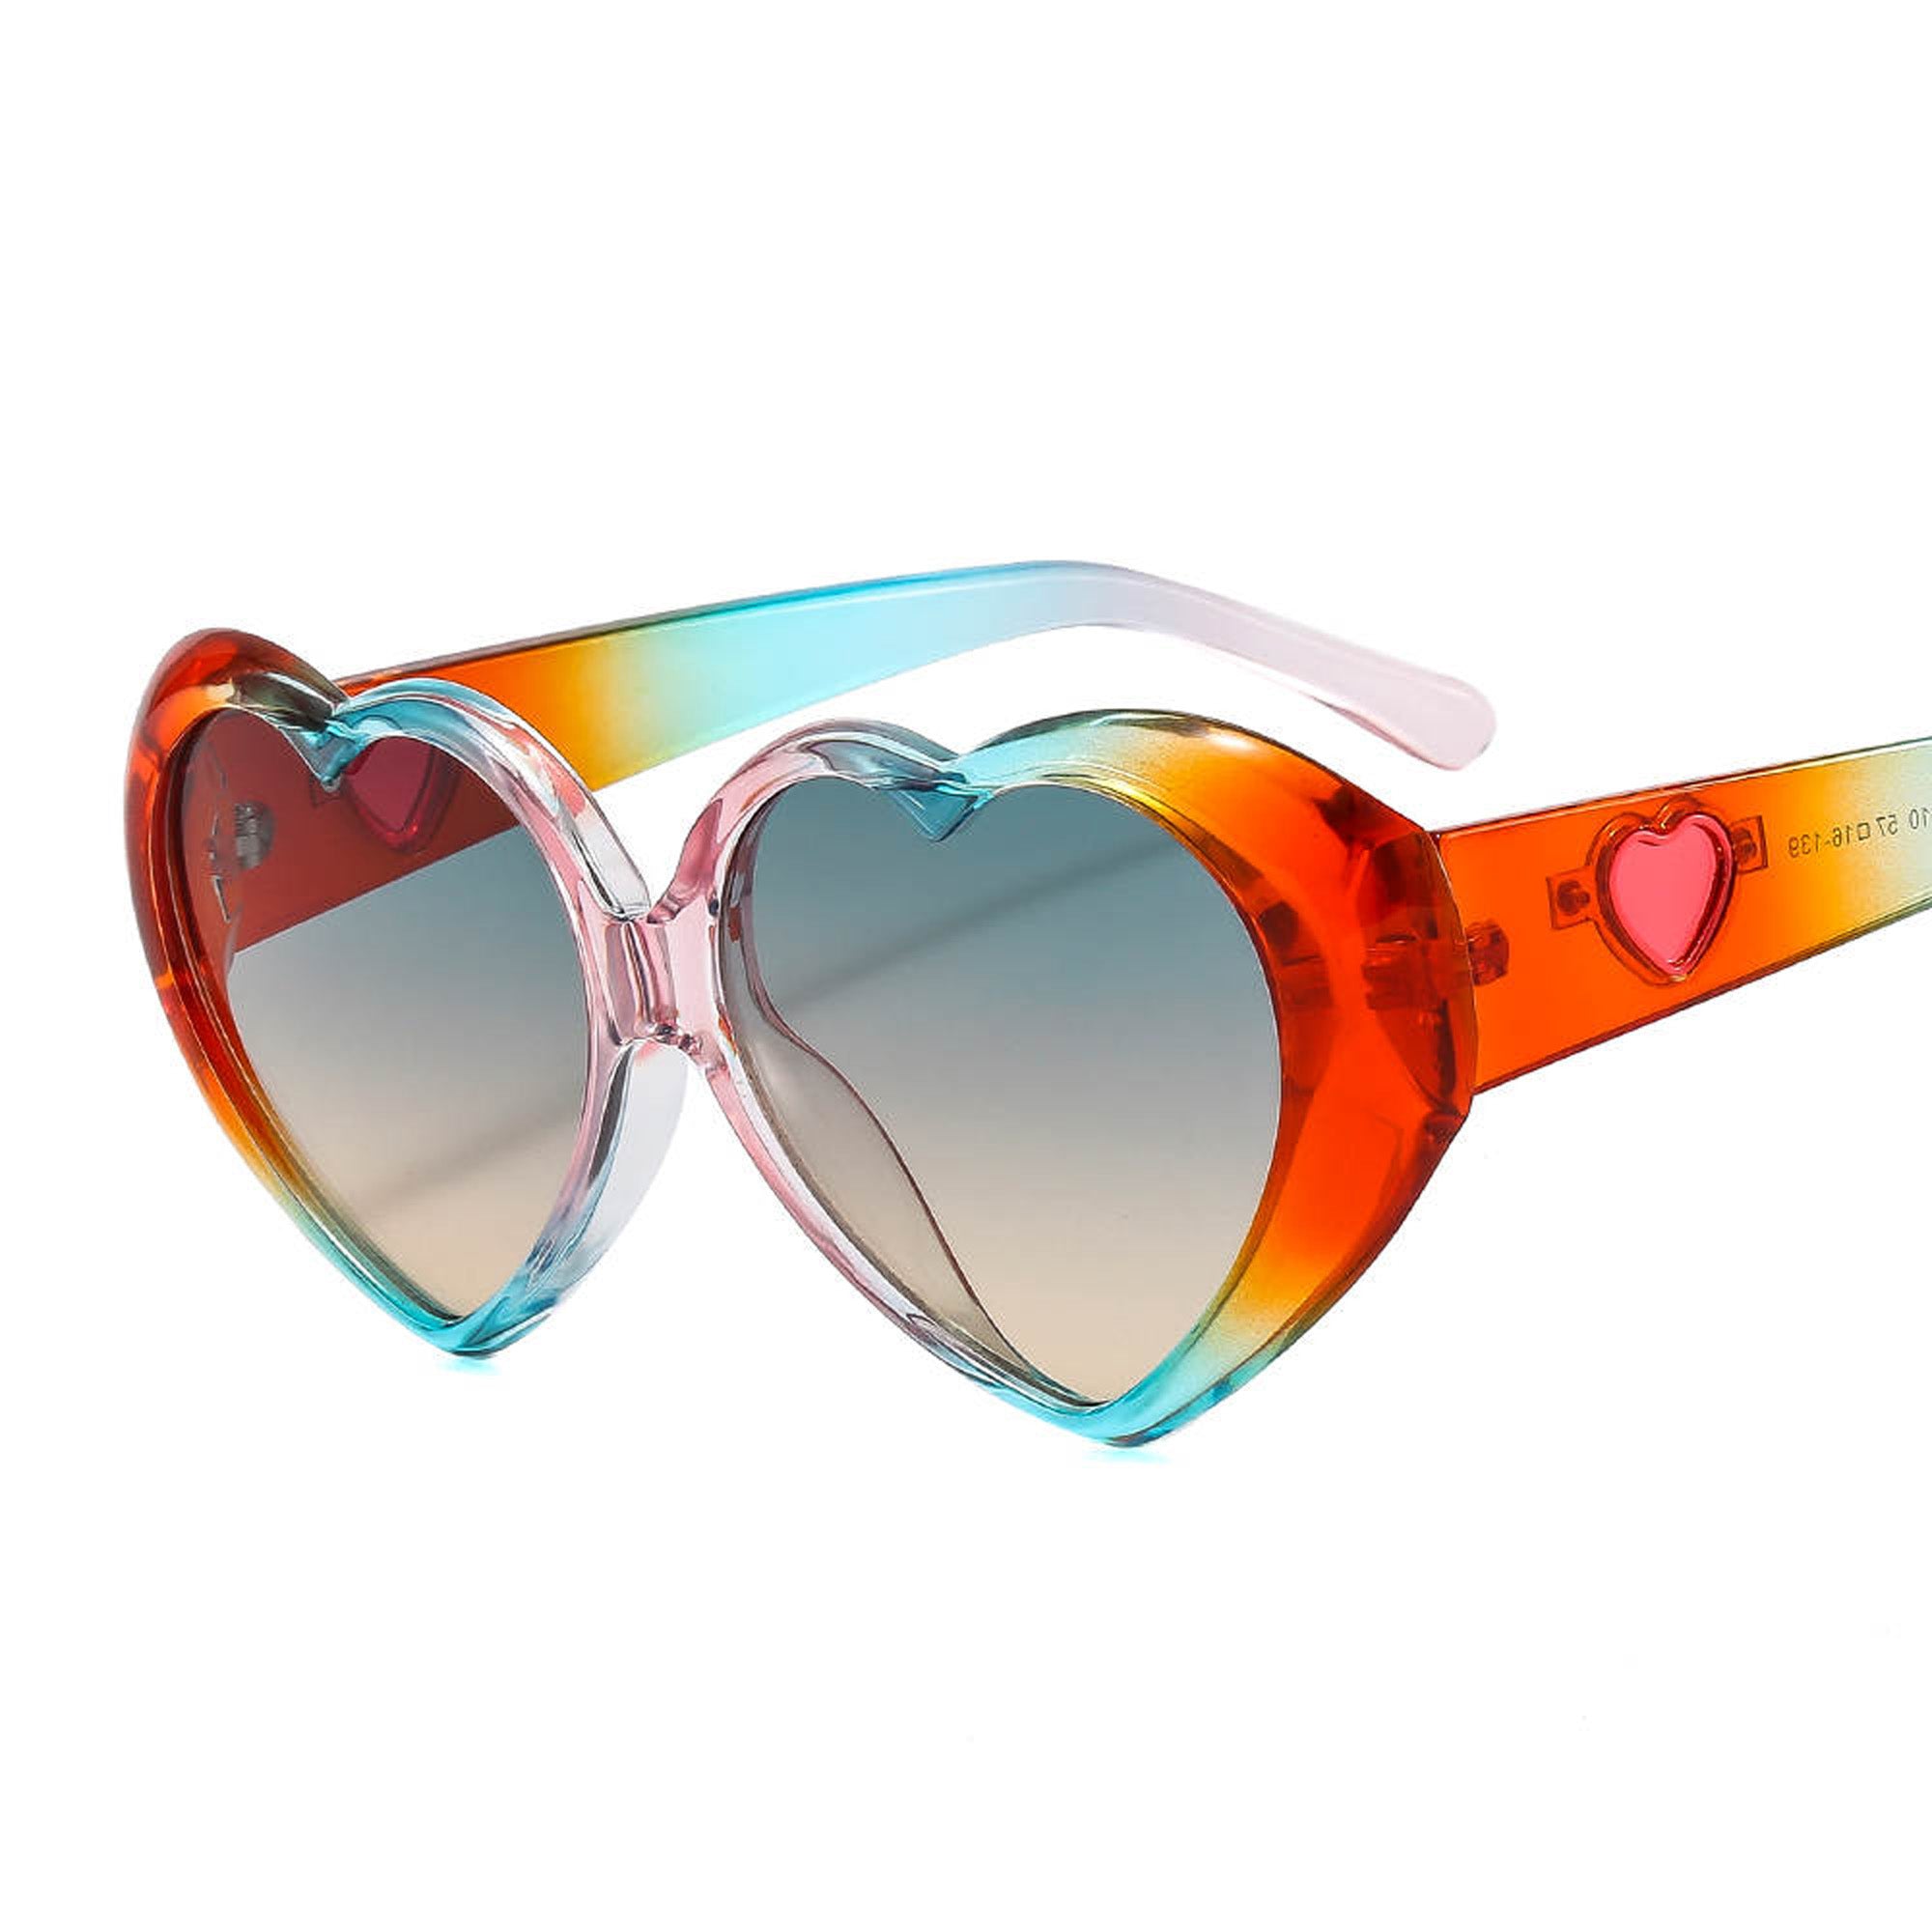 Orange and Blue Shaped Sunglasses for Adults